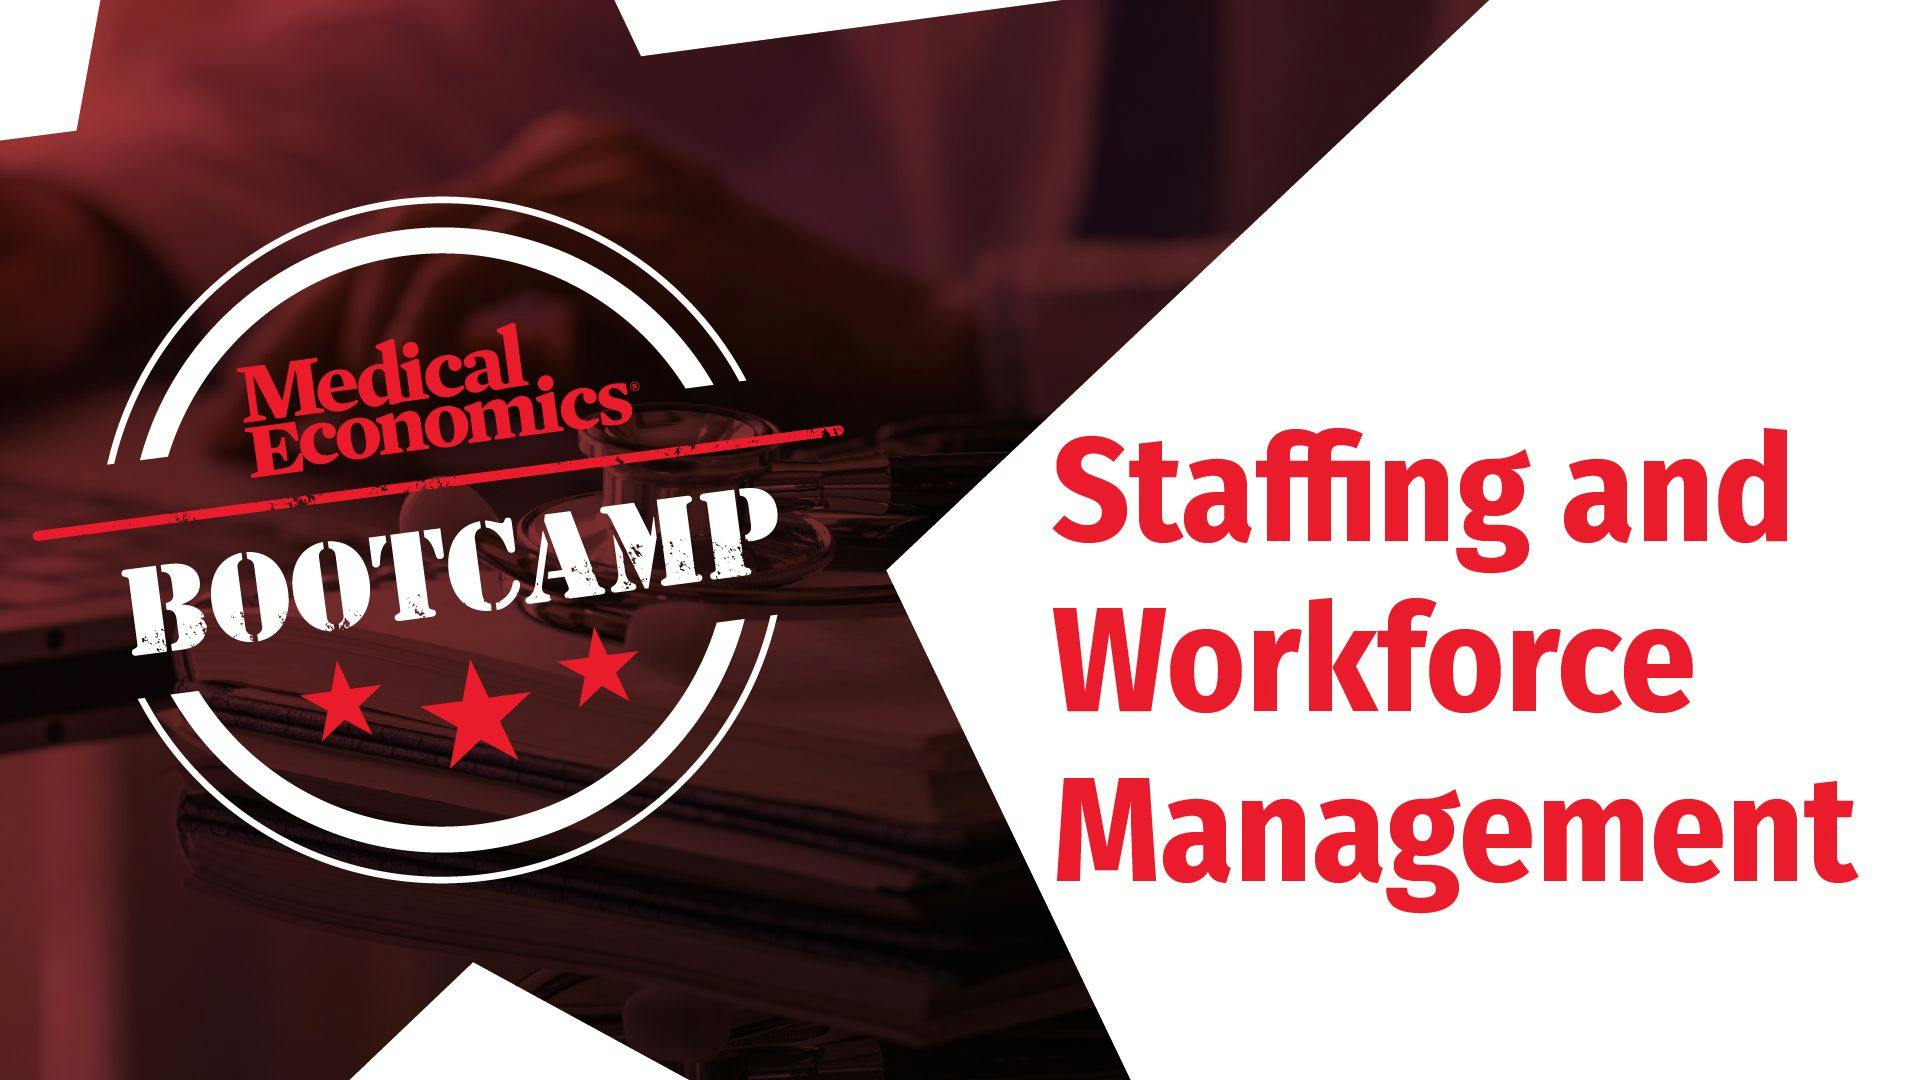 Session 2: Calling for Reinforcements: Staffing and Workforce Management